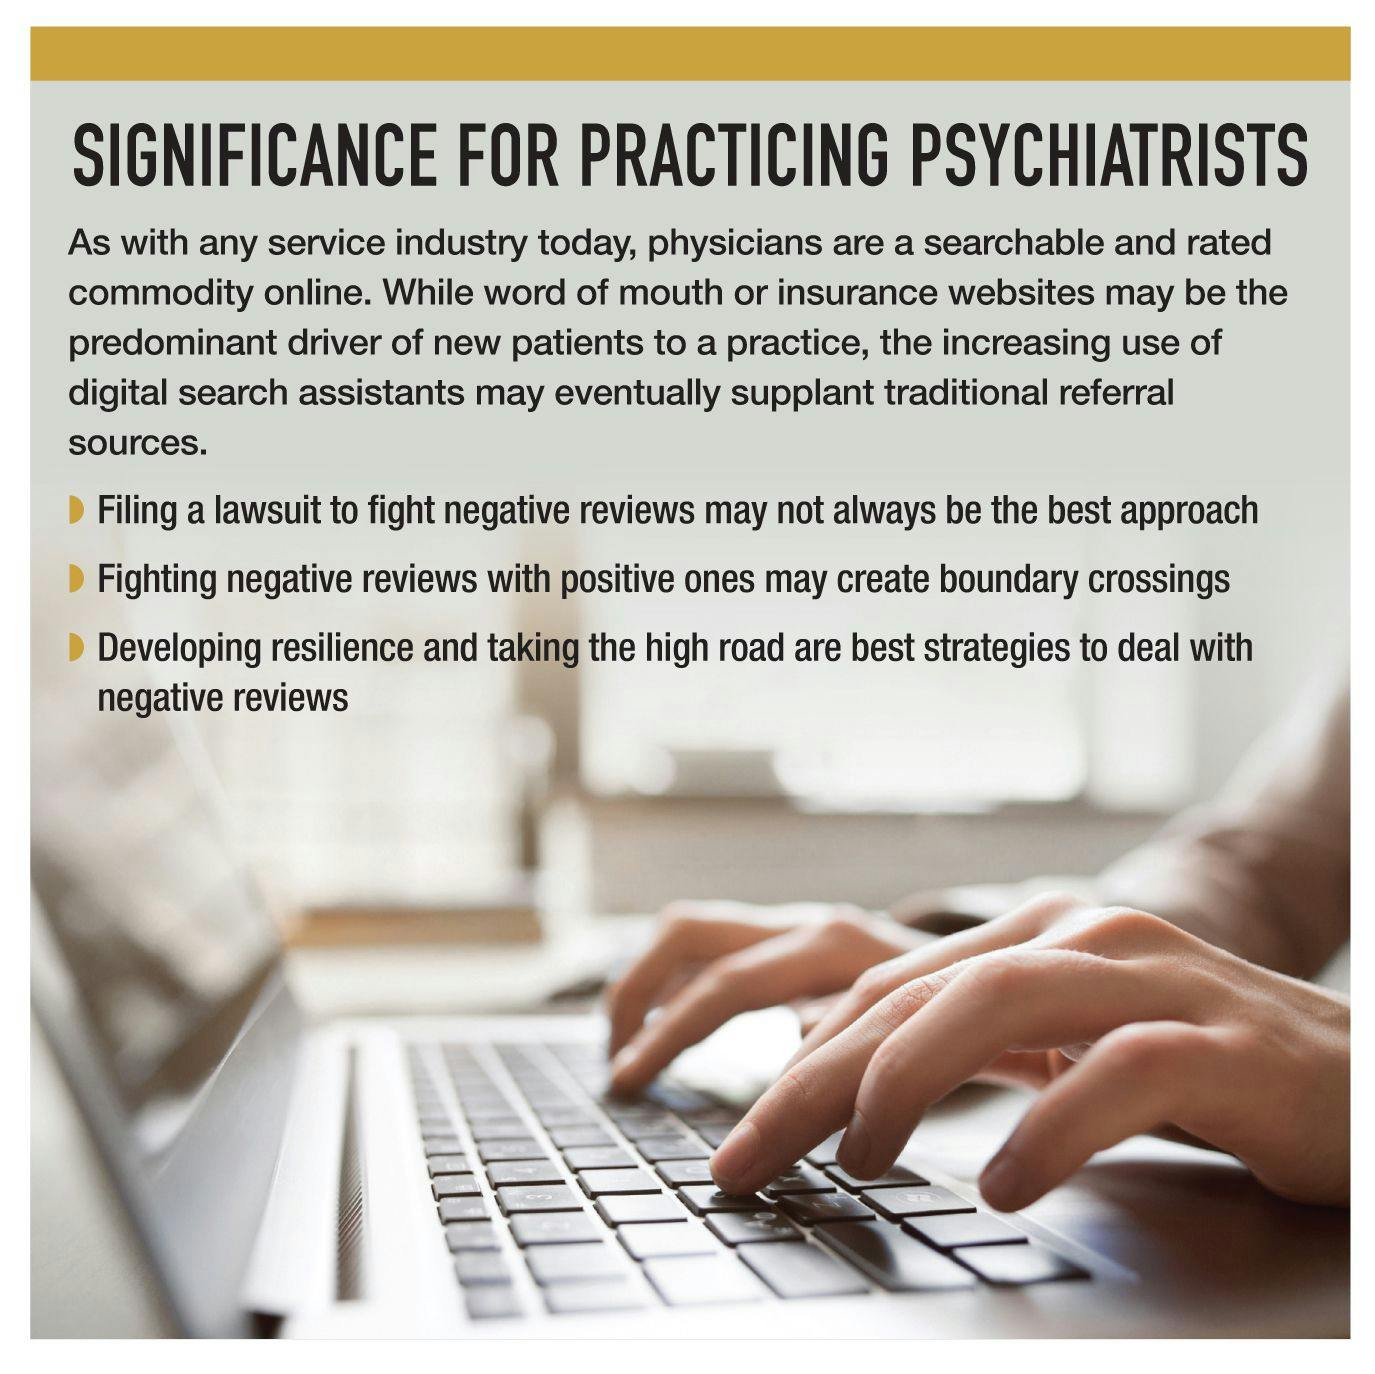 Significance for practicing psychiatrists